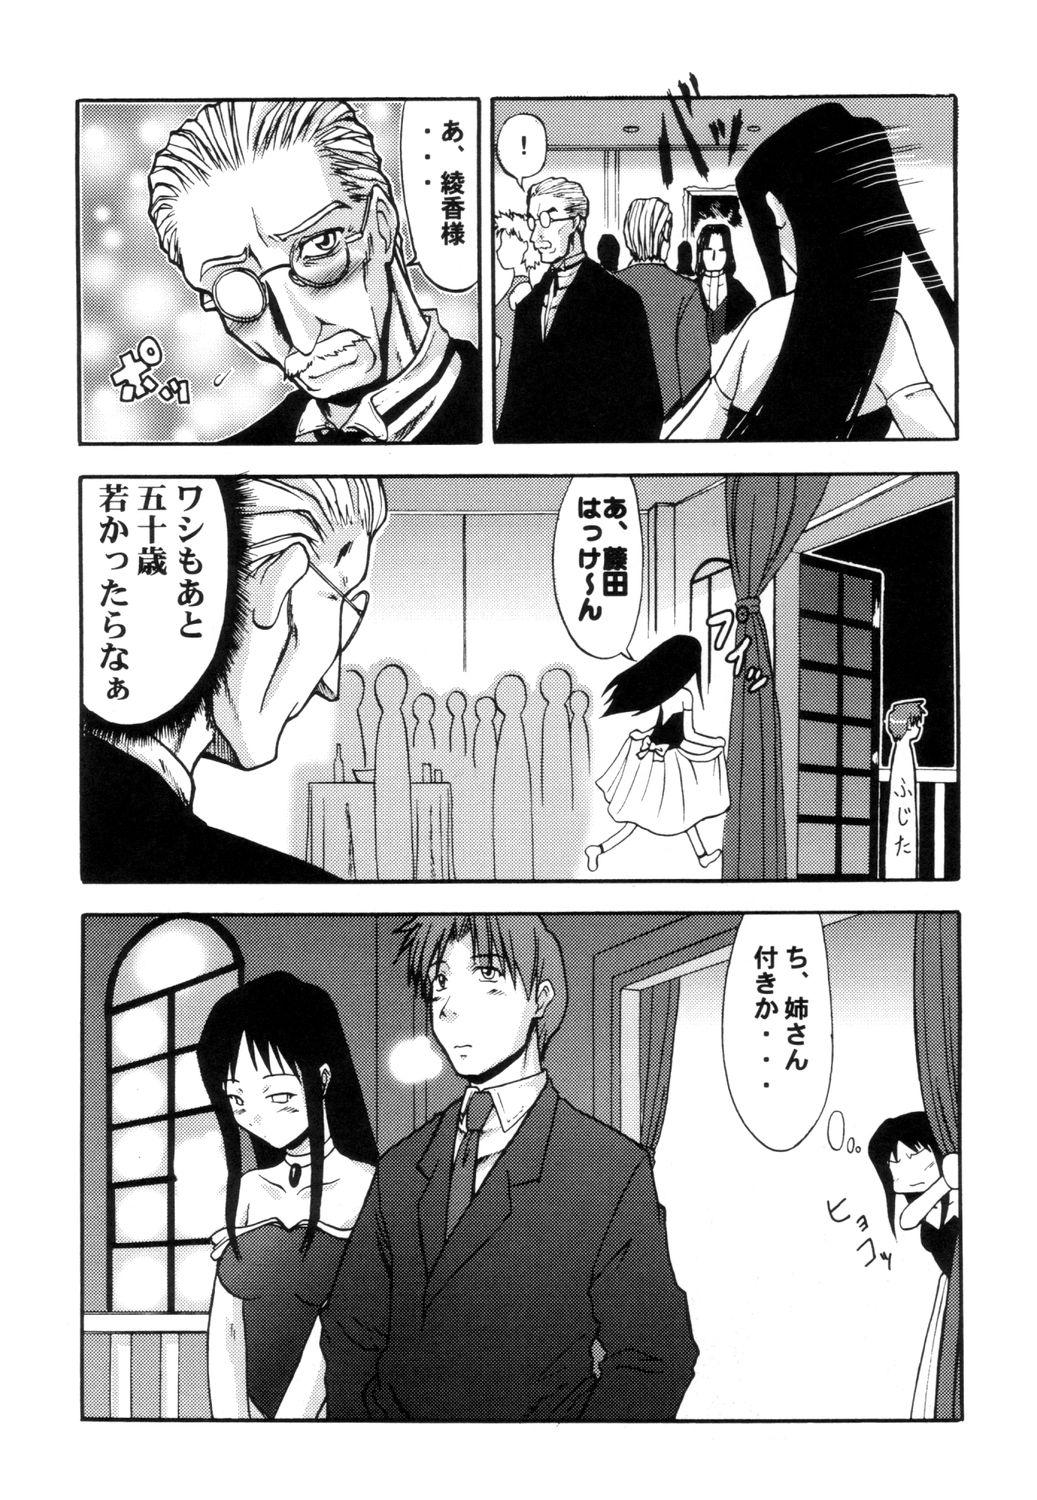 Audition Ayaka the Grappler 6 - To heart Hellsing Bro - Page 6